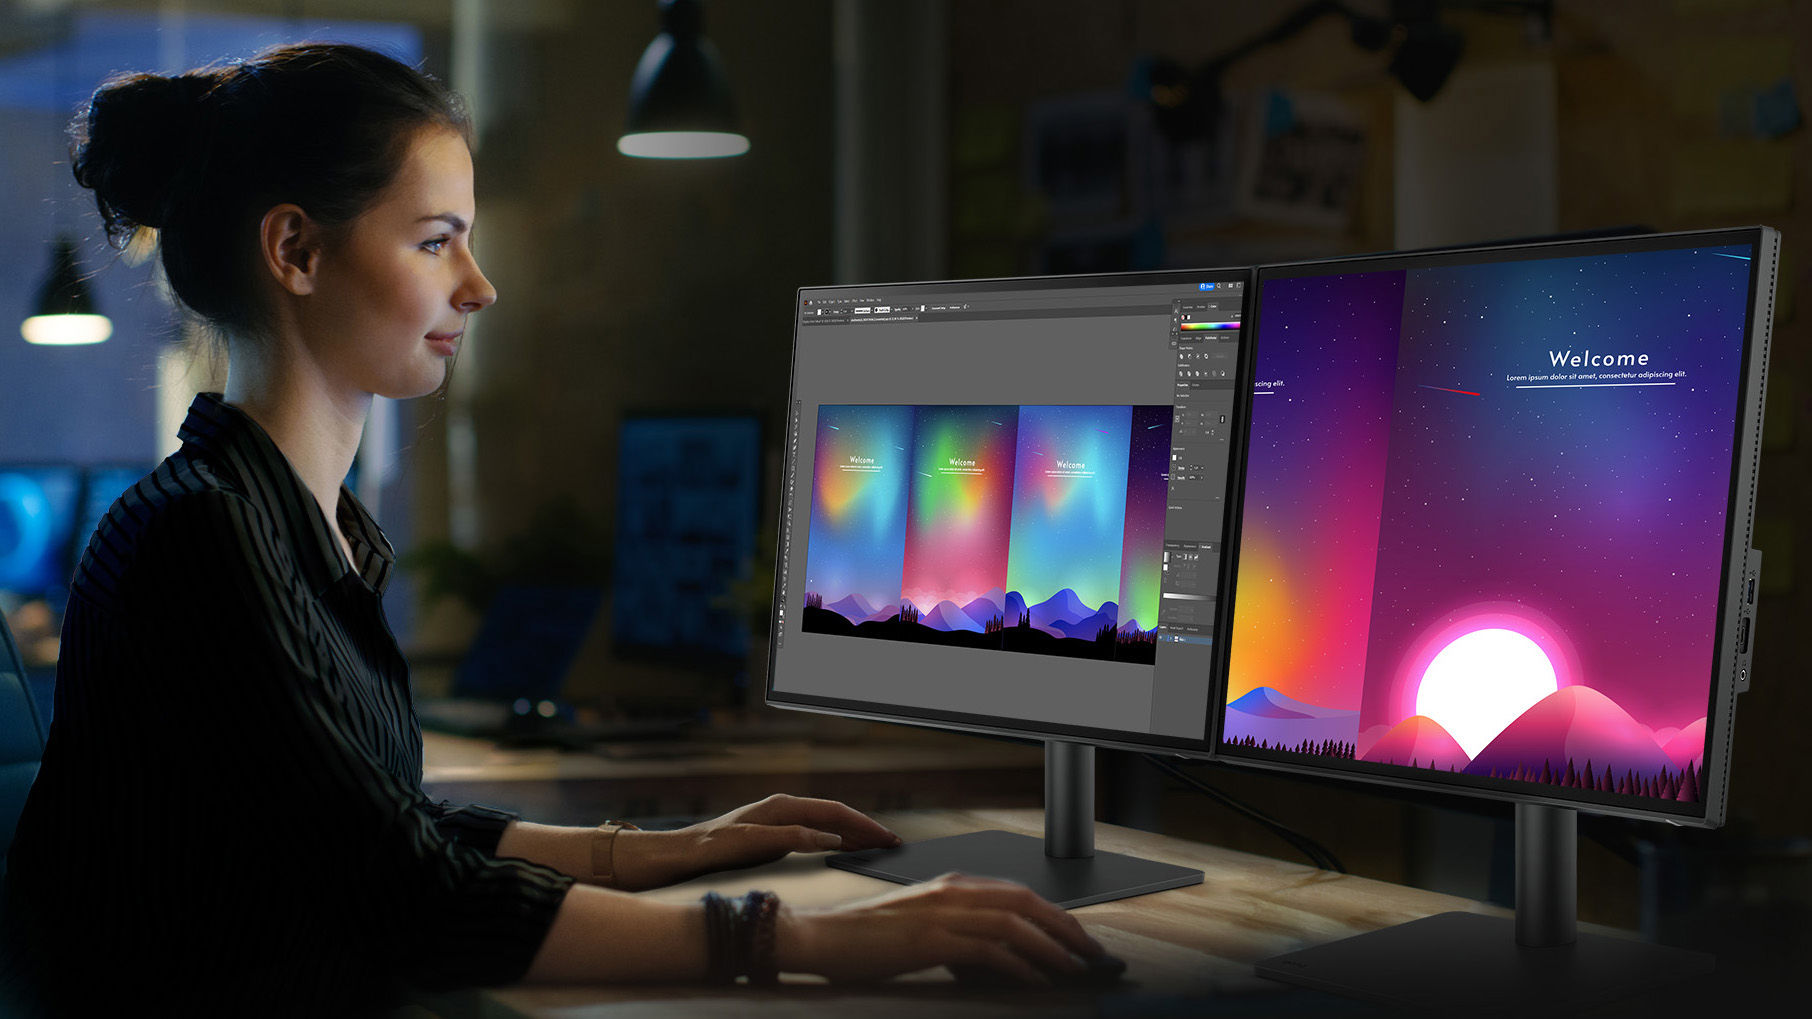 Get matching colors on both monitors based on your visual perception with BenQ Display ColorTalk